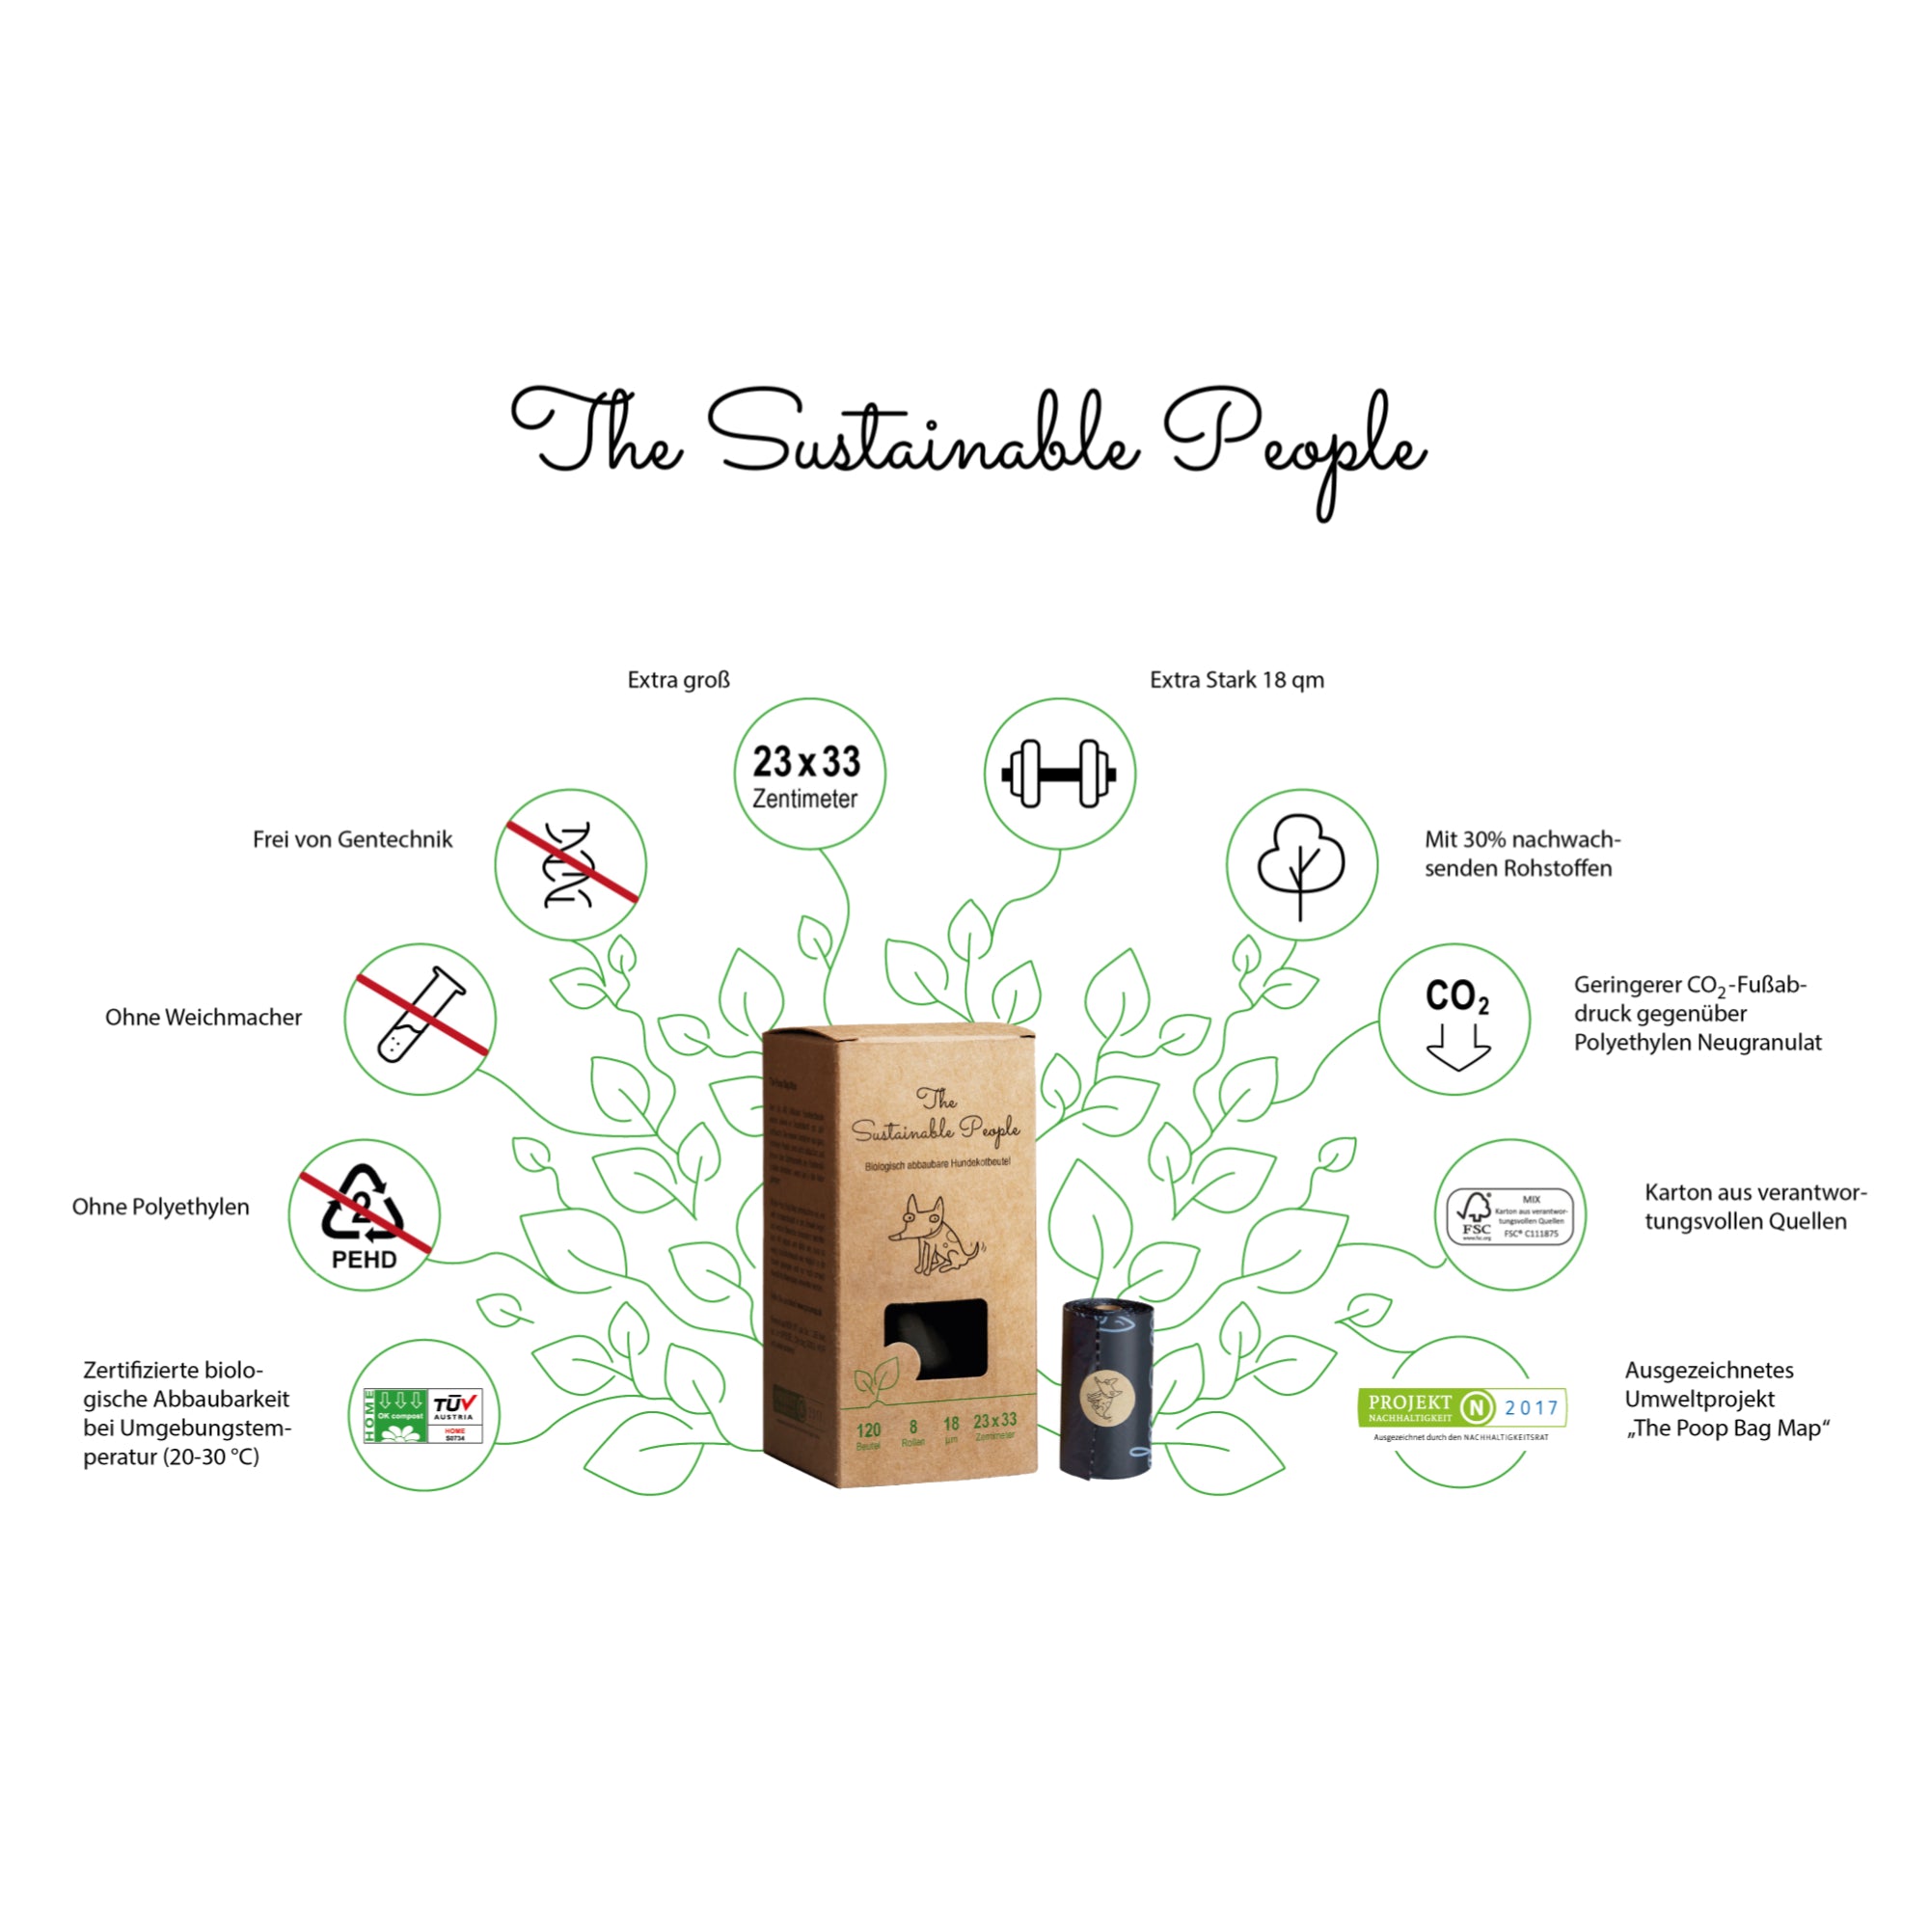 Biodegradable dog waste bags